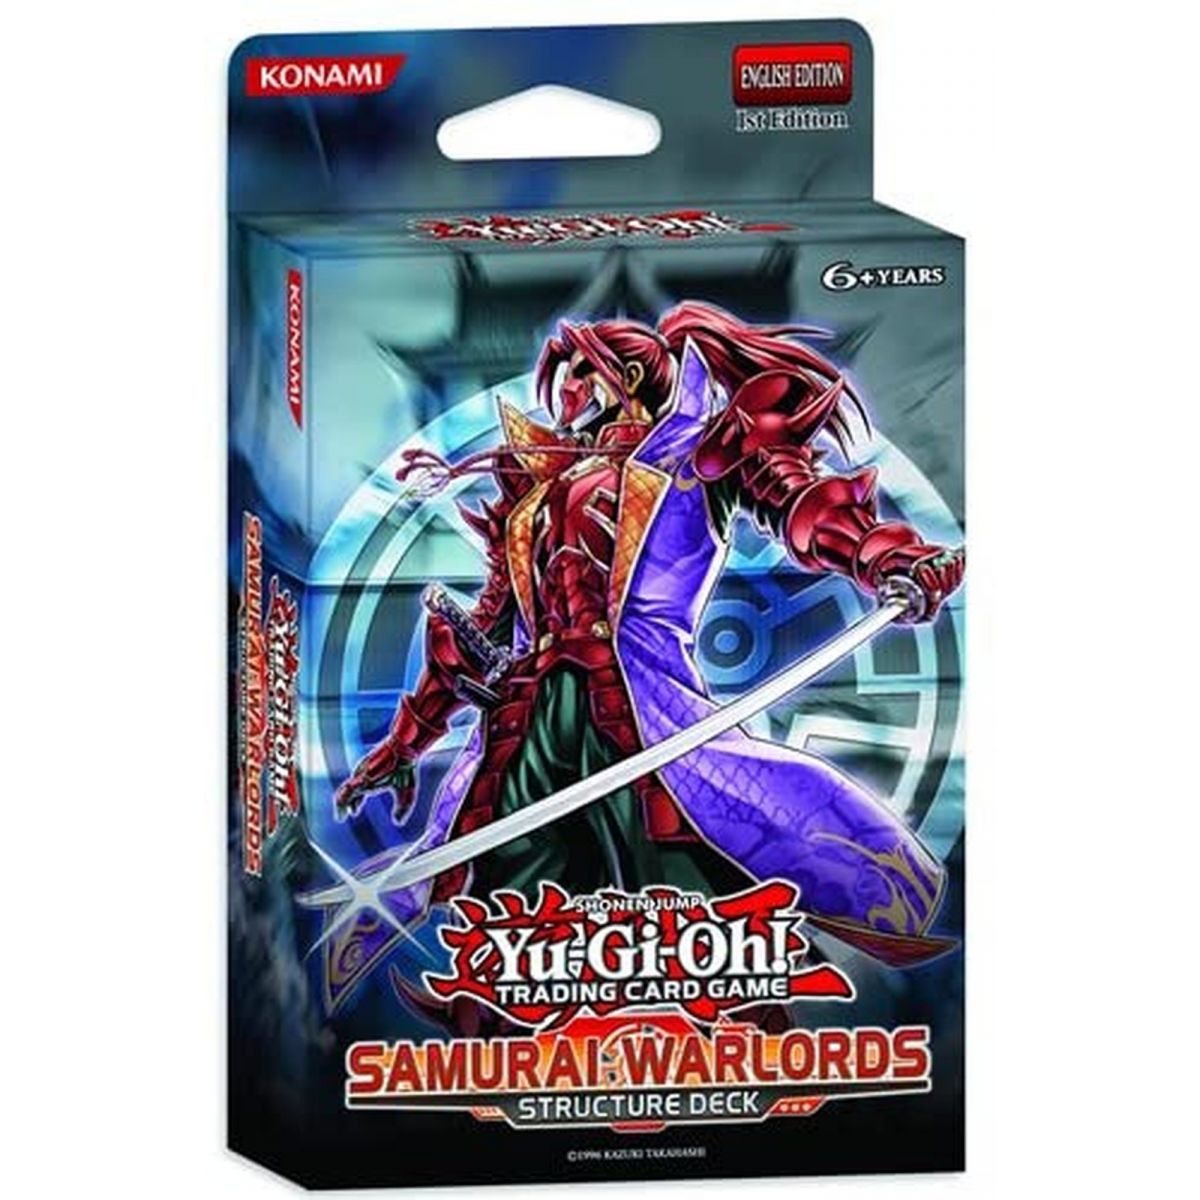 *US Print SEALED* Yu-Gi-Oh! Structure Deck - Samurai Warlords - 1st Edition